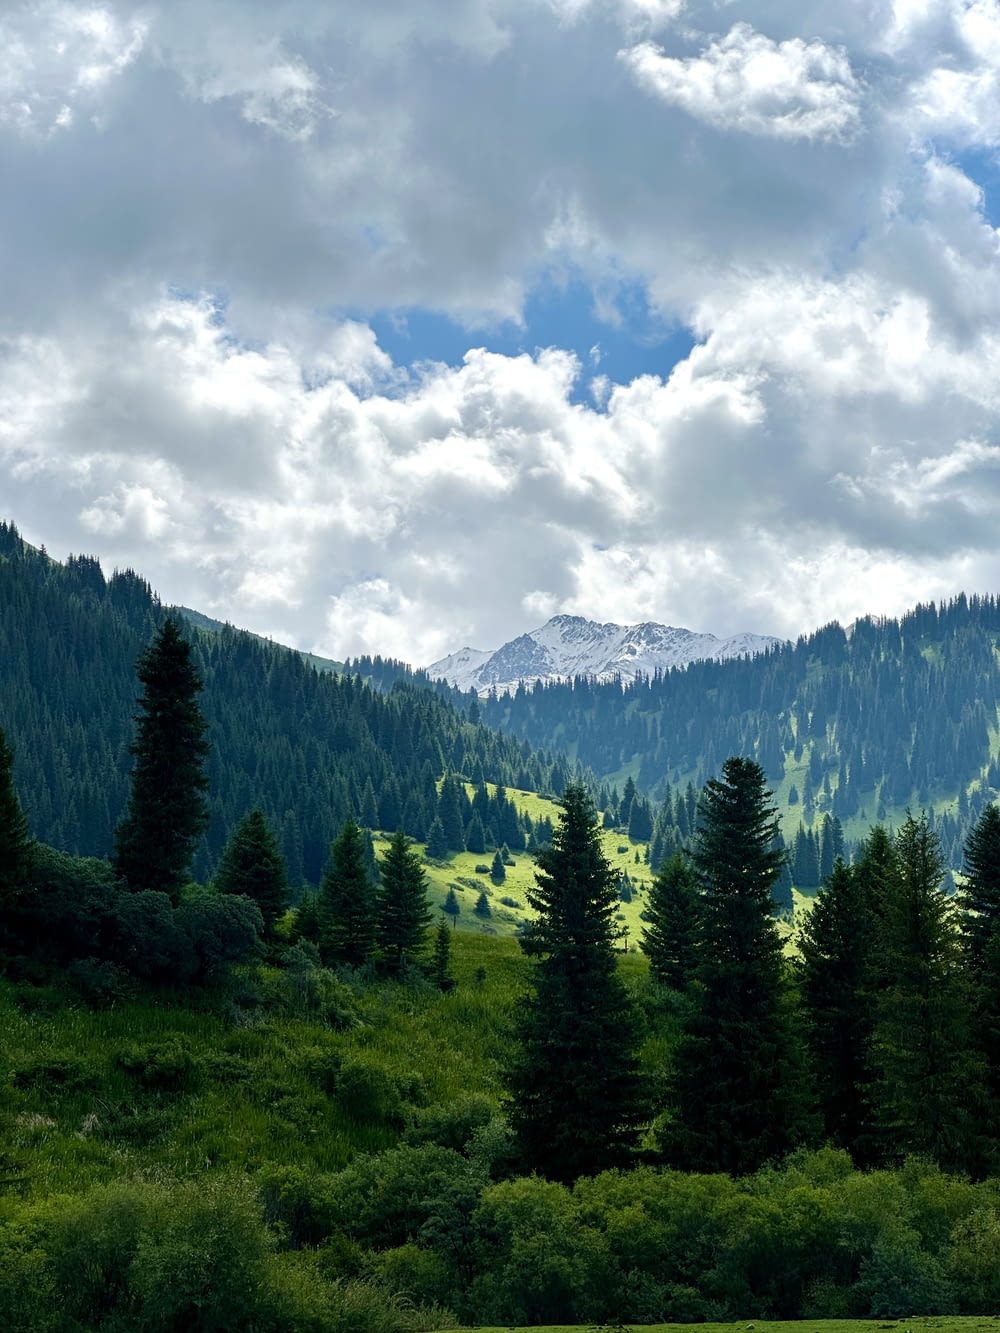 a lush green forest filled with trees under a cloudy sky